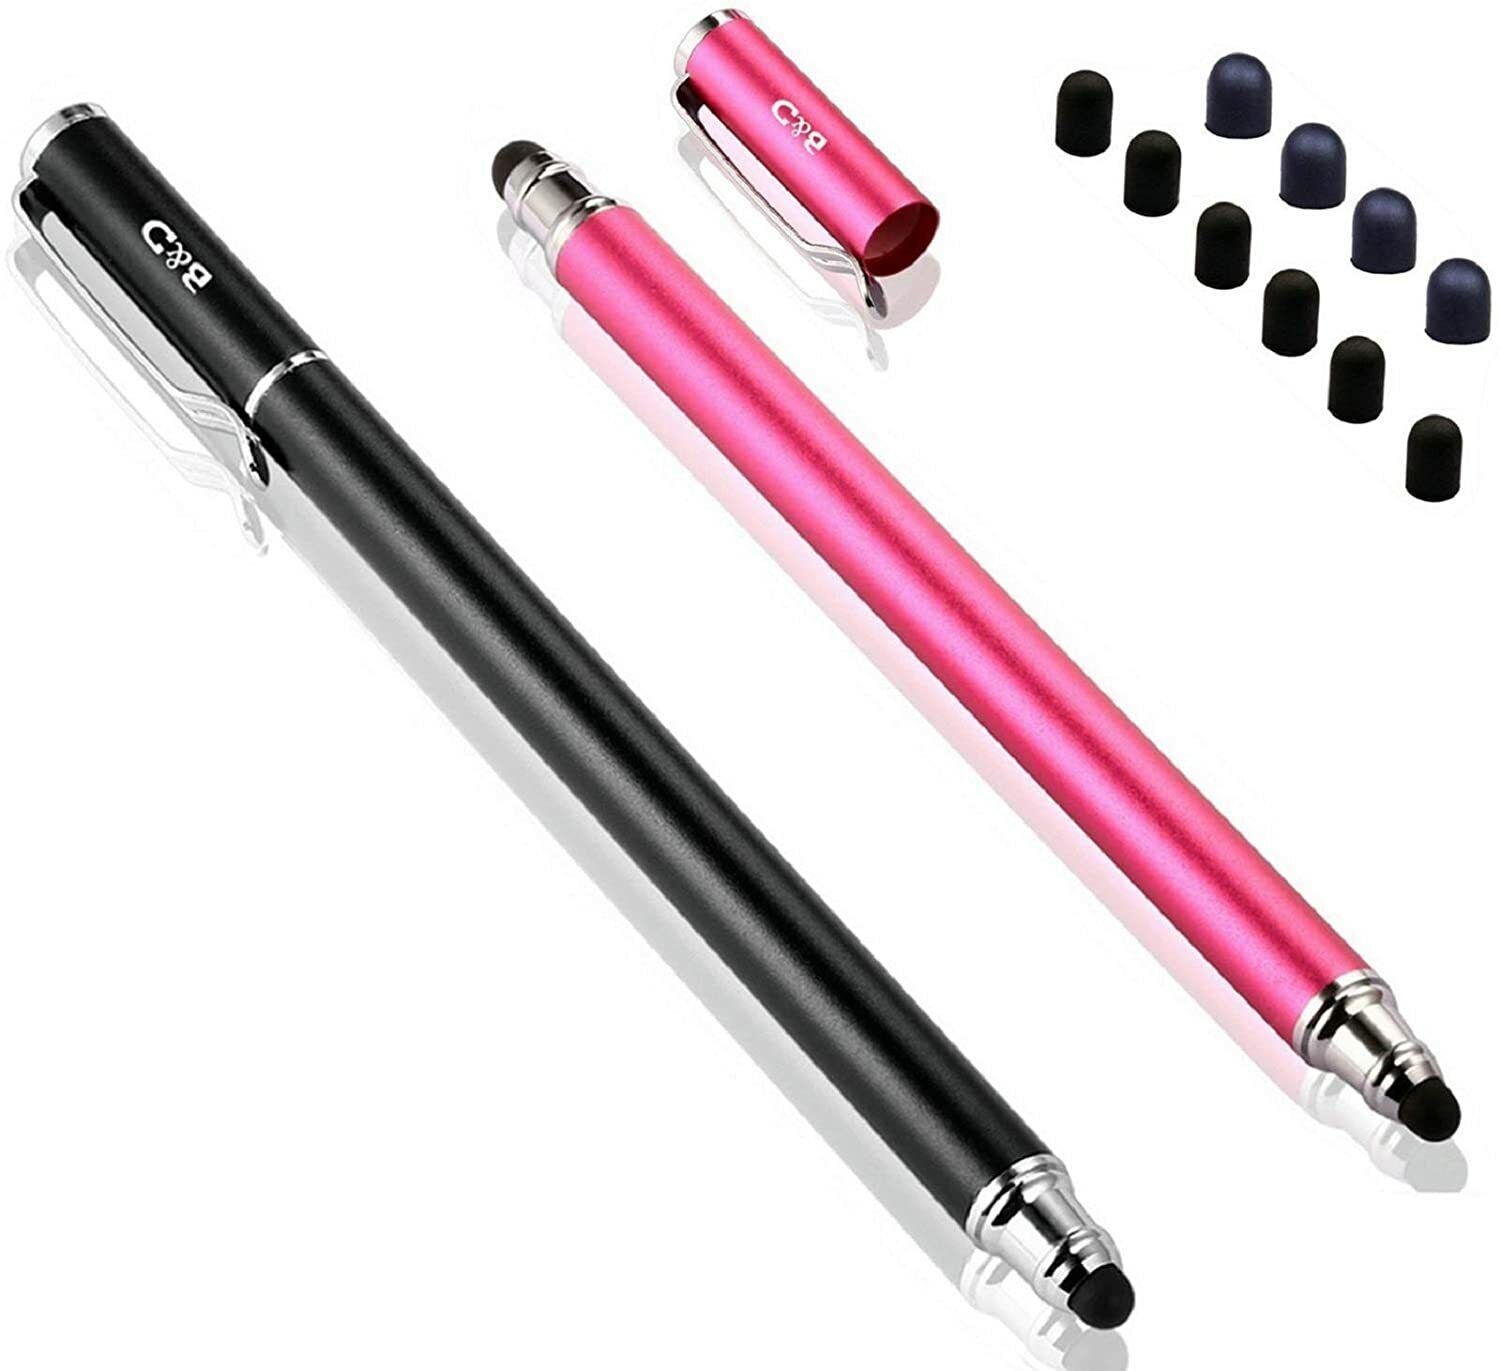 (2 Pcs) [0.18-inch Small Tip Series] 2-in-1 Bargains Depot Stylus Black/Pink